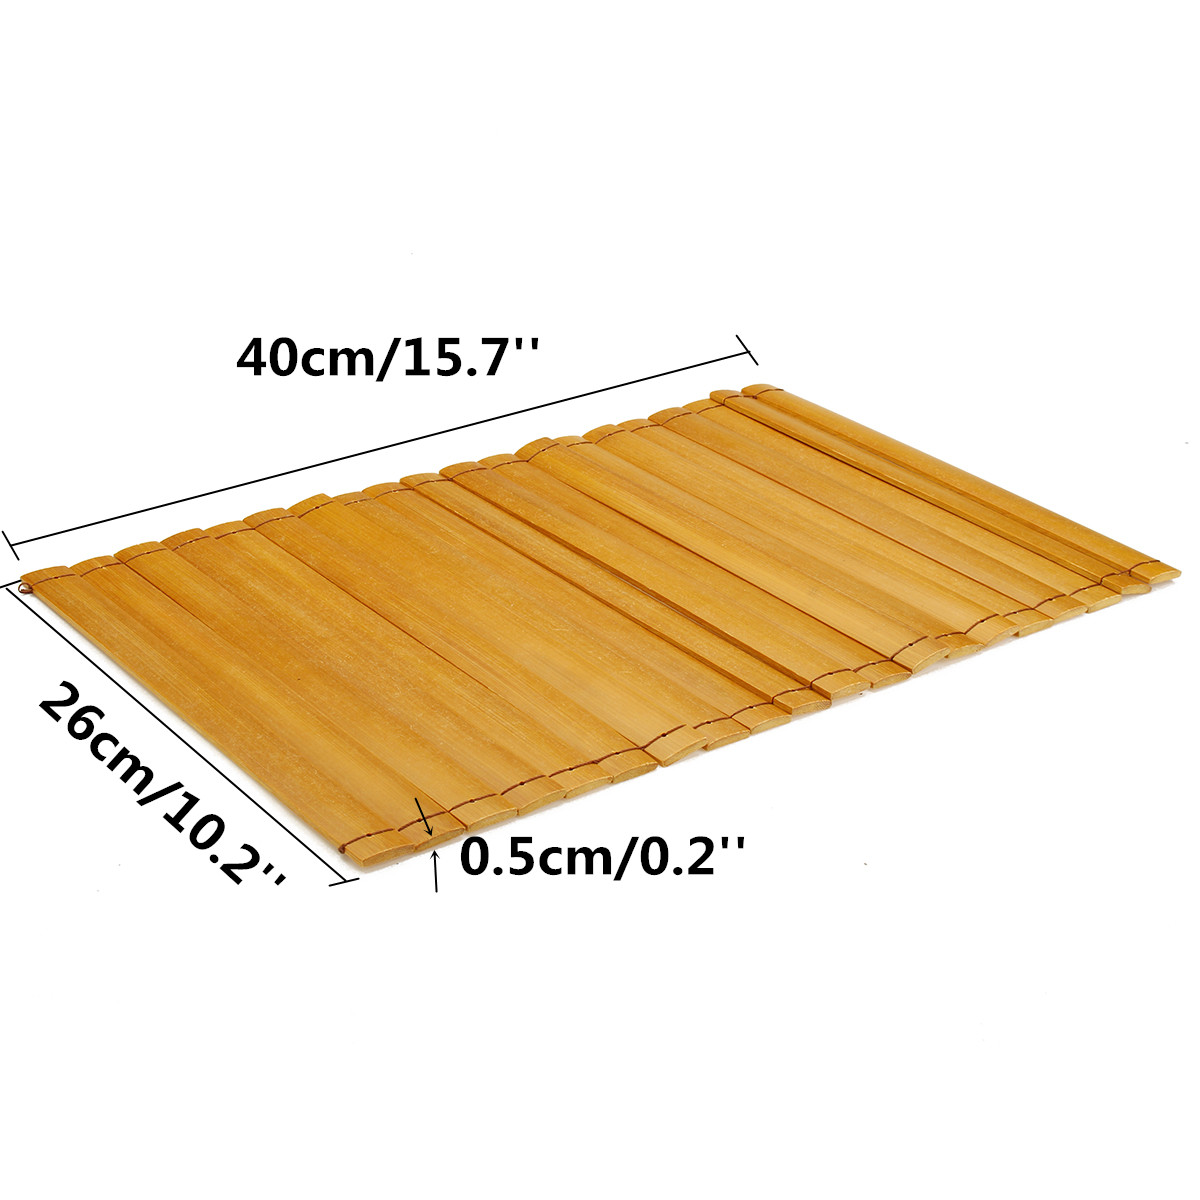 Wood-Sofa-Arm-Rest-Tray-Flexible-Couch-Placemat-Bamboo-Foldable-Snack-Holder-Table-Pad-1557167